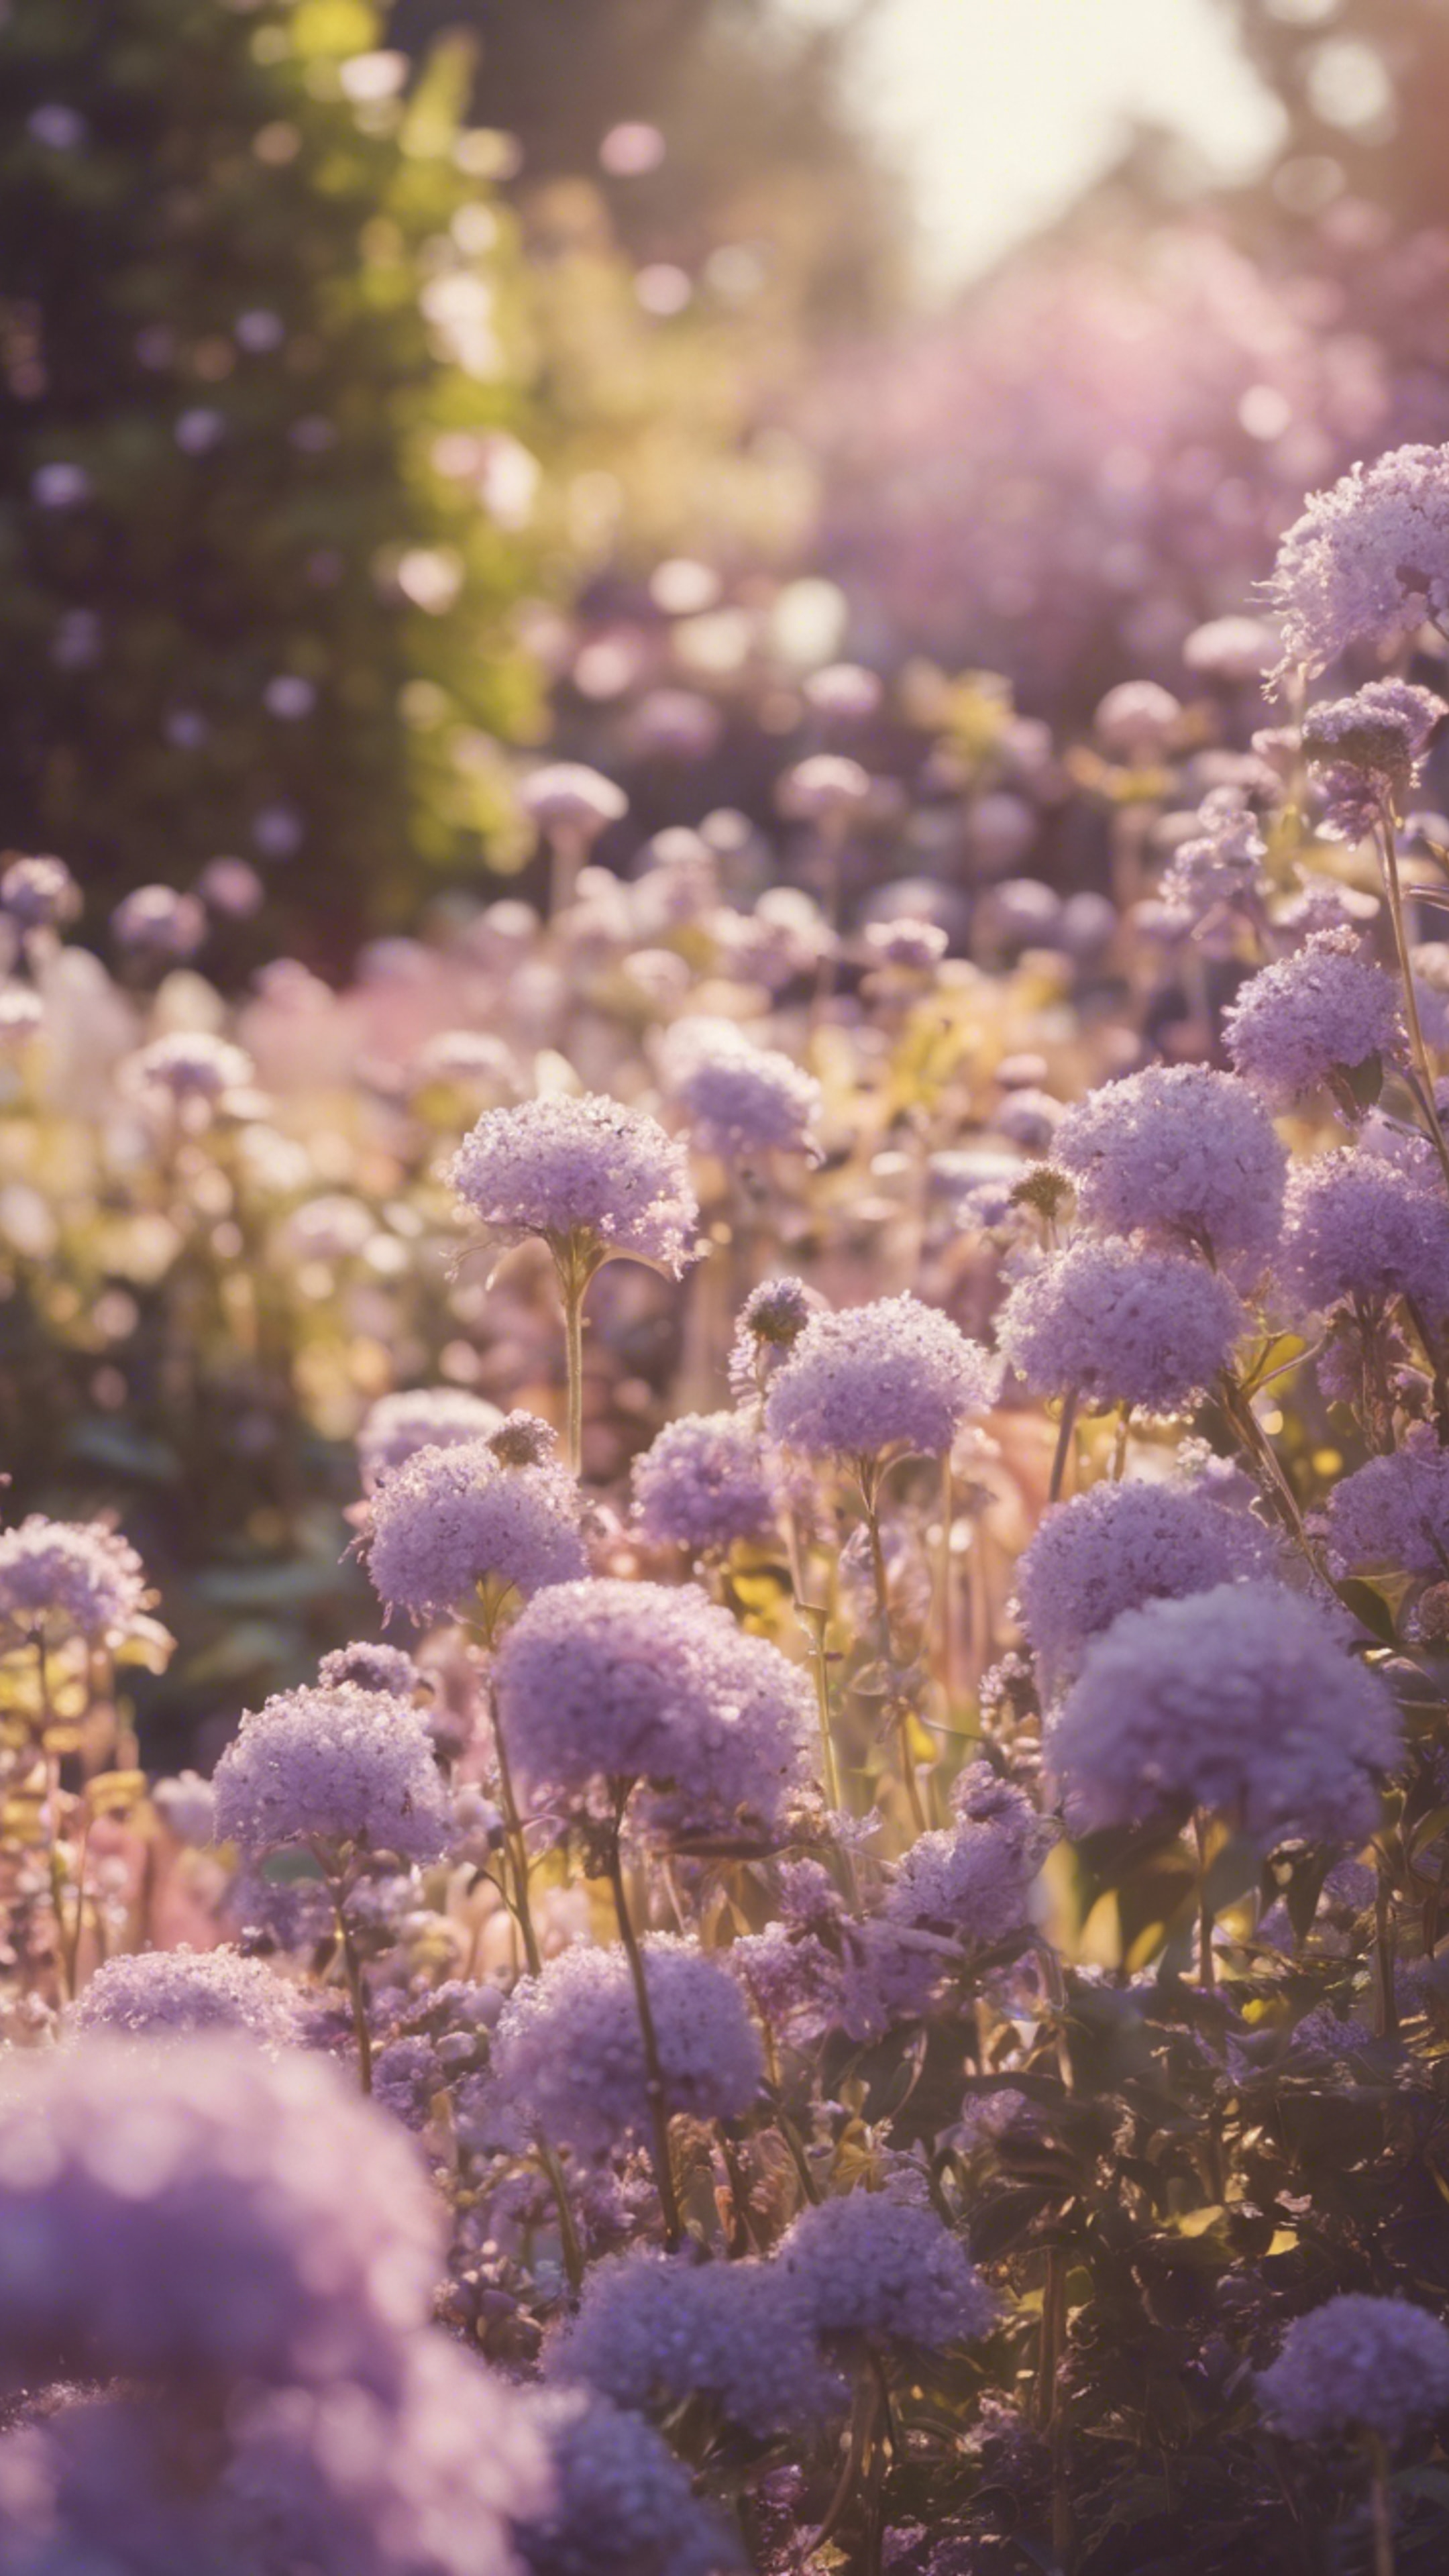 A pastel purple garden in full bloom during a sunny afternoon. Валлпапер[0a3f4f6cbc4b447bb231]